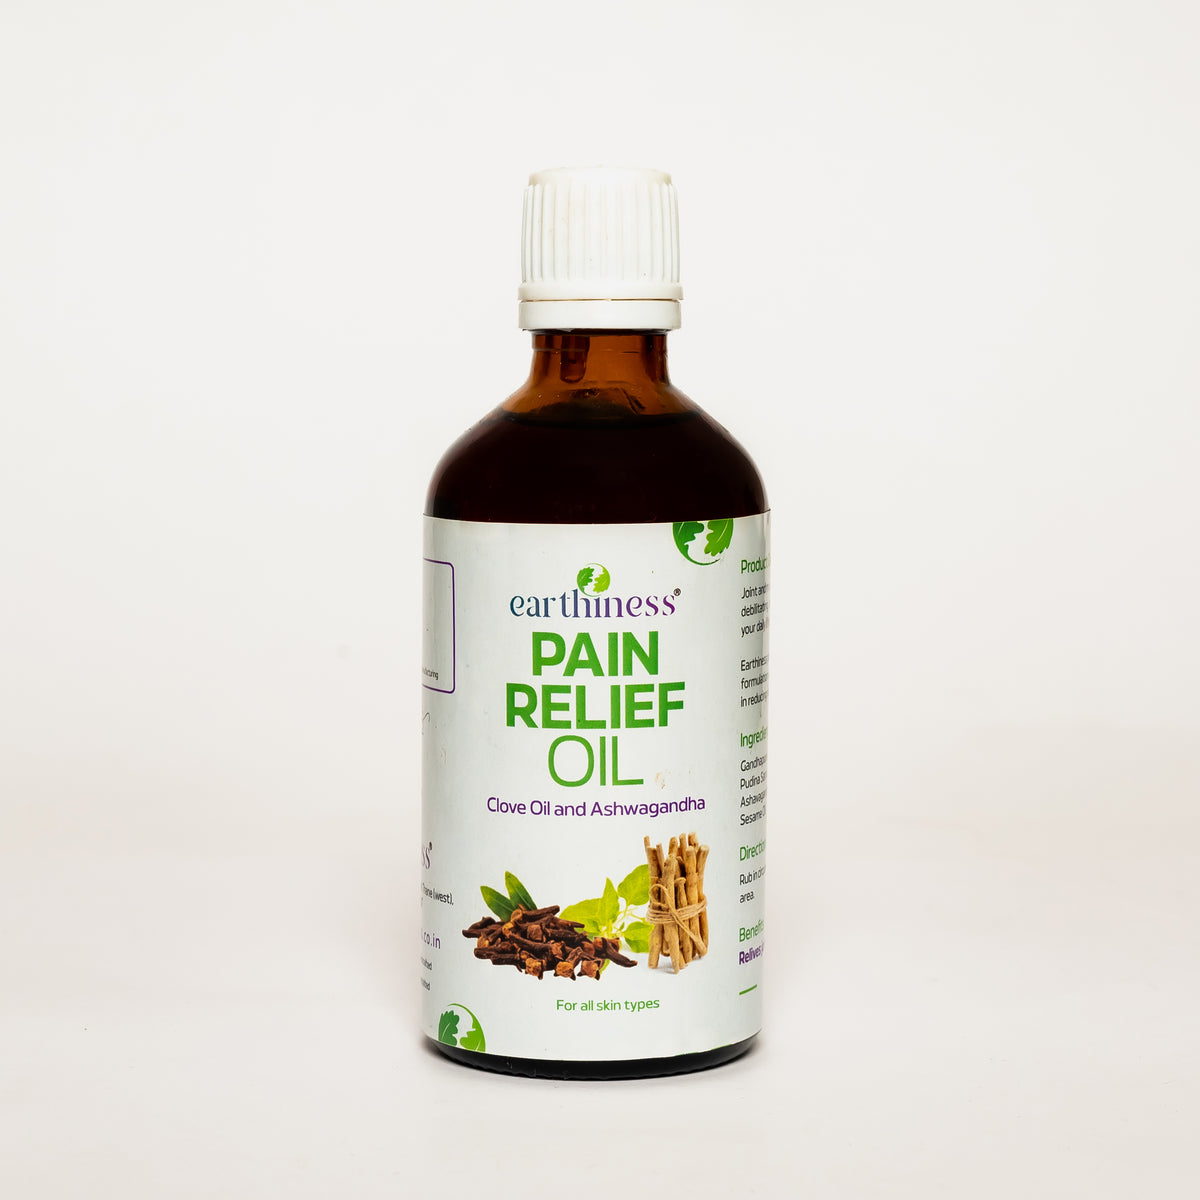 Pain Relief Oil with Clove Oil and Ashwagandha For Muscular Pain